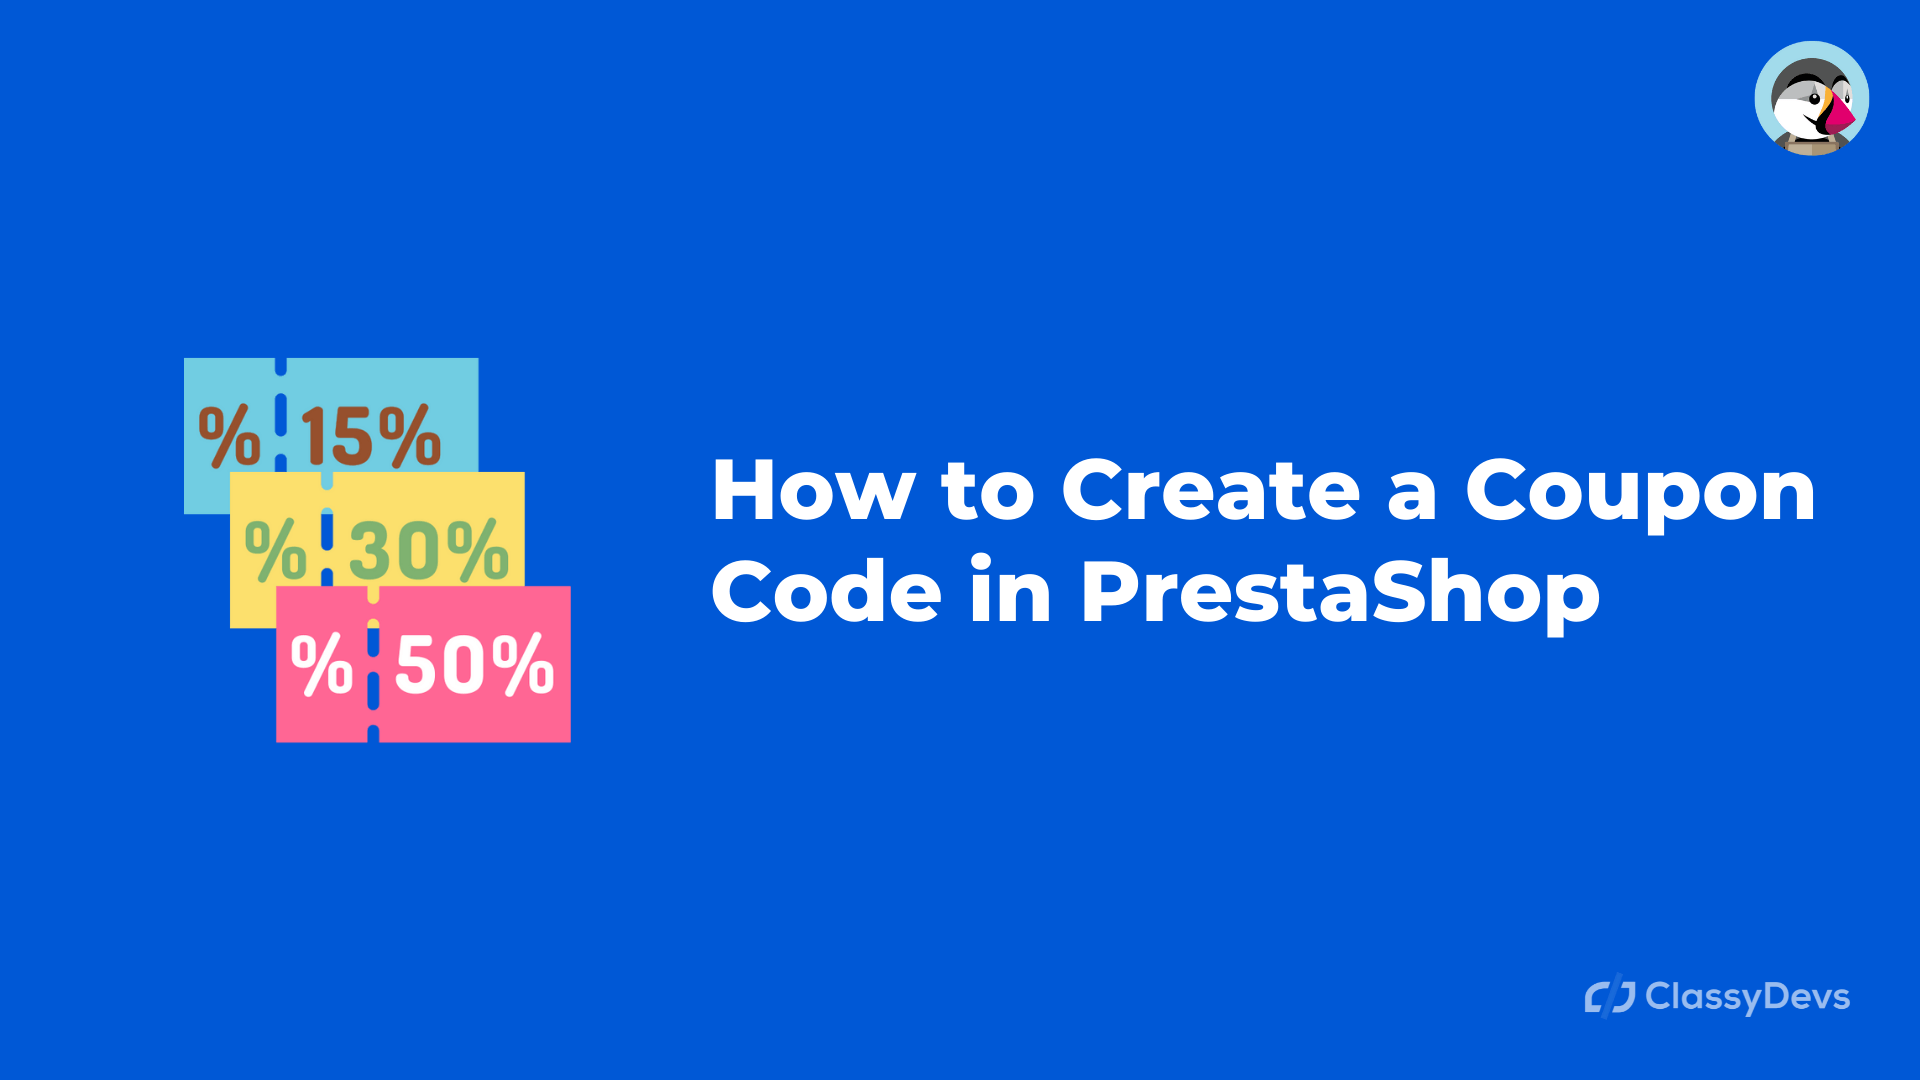 How to Create a Coupon Code in PrestaShop